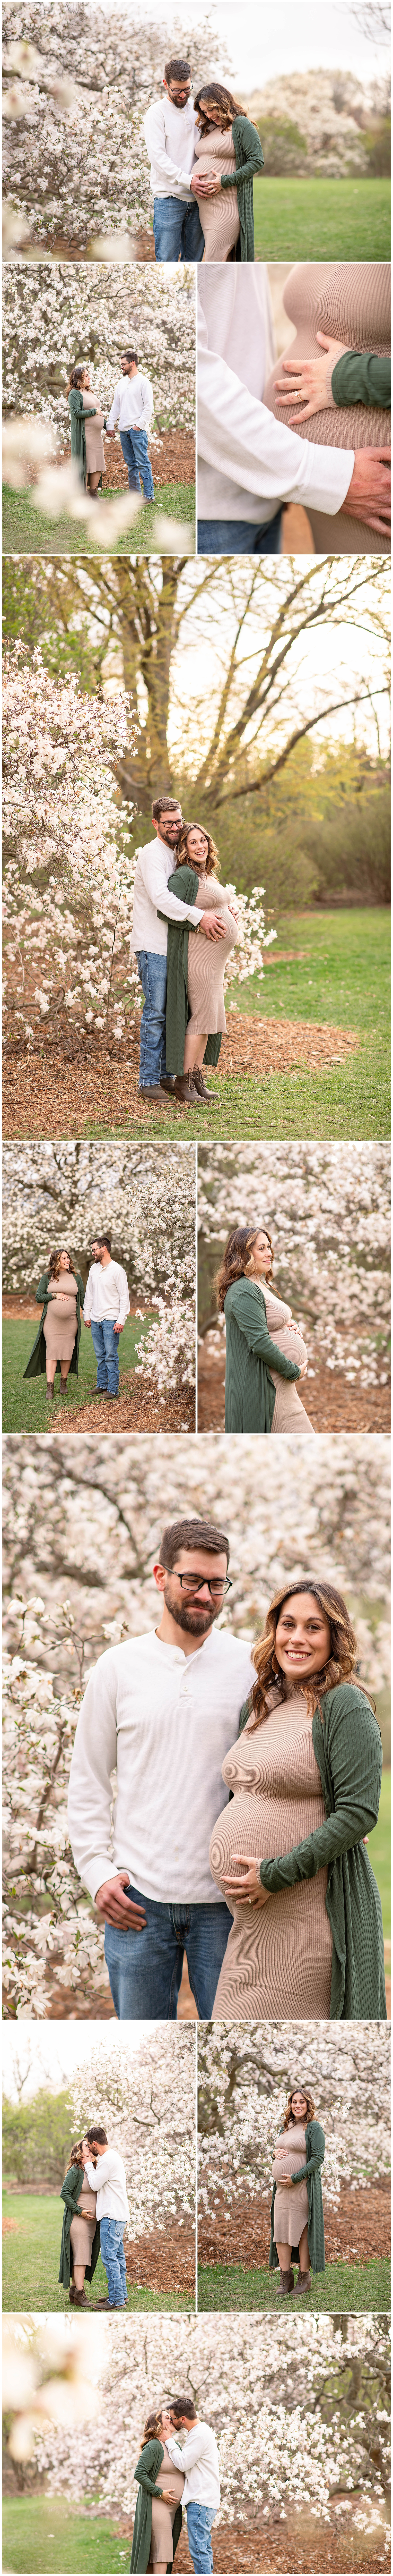 Maternity Session in Madison, WI during Spring Blooms with Kuffel Photography @ Uw Arboretum